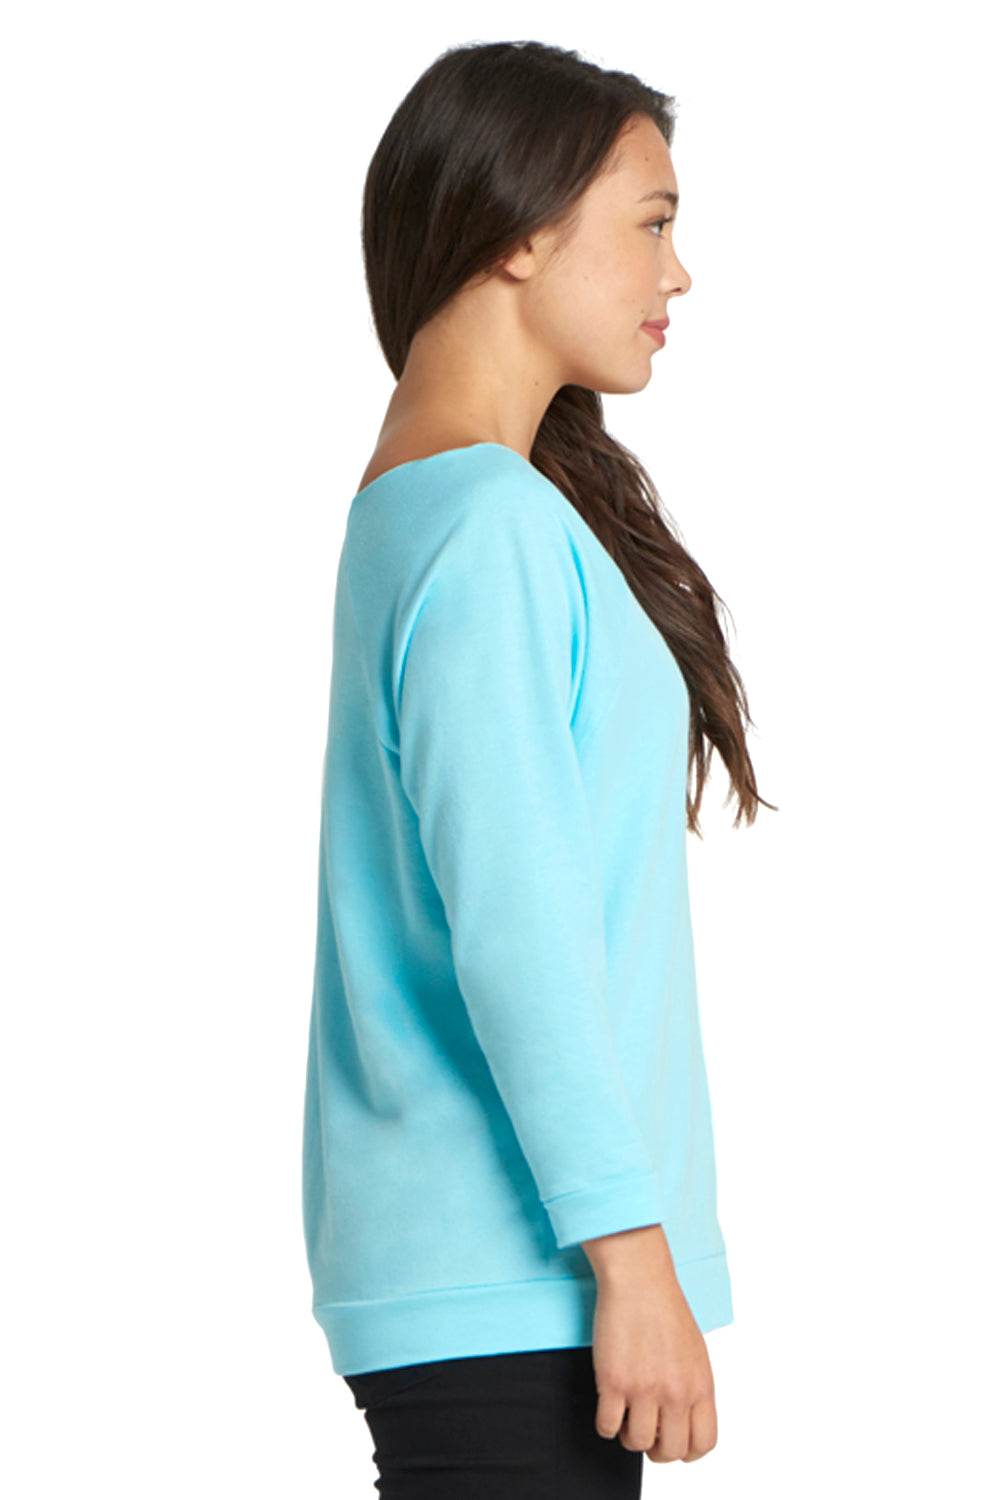 Next Level 6951 French Terry 3/4 Sleeve Wide Neck T-Shirt Cancun Blue Side